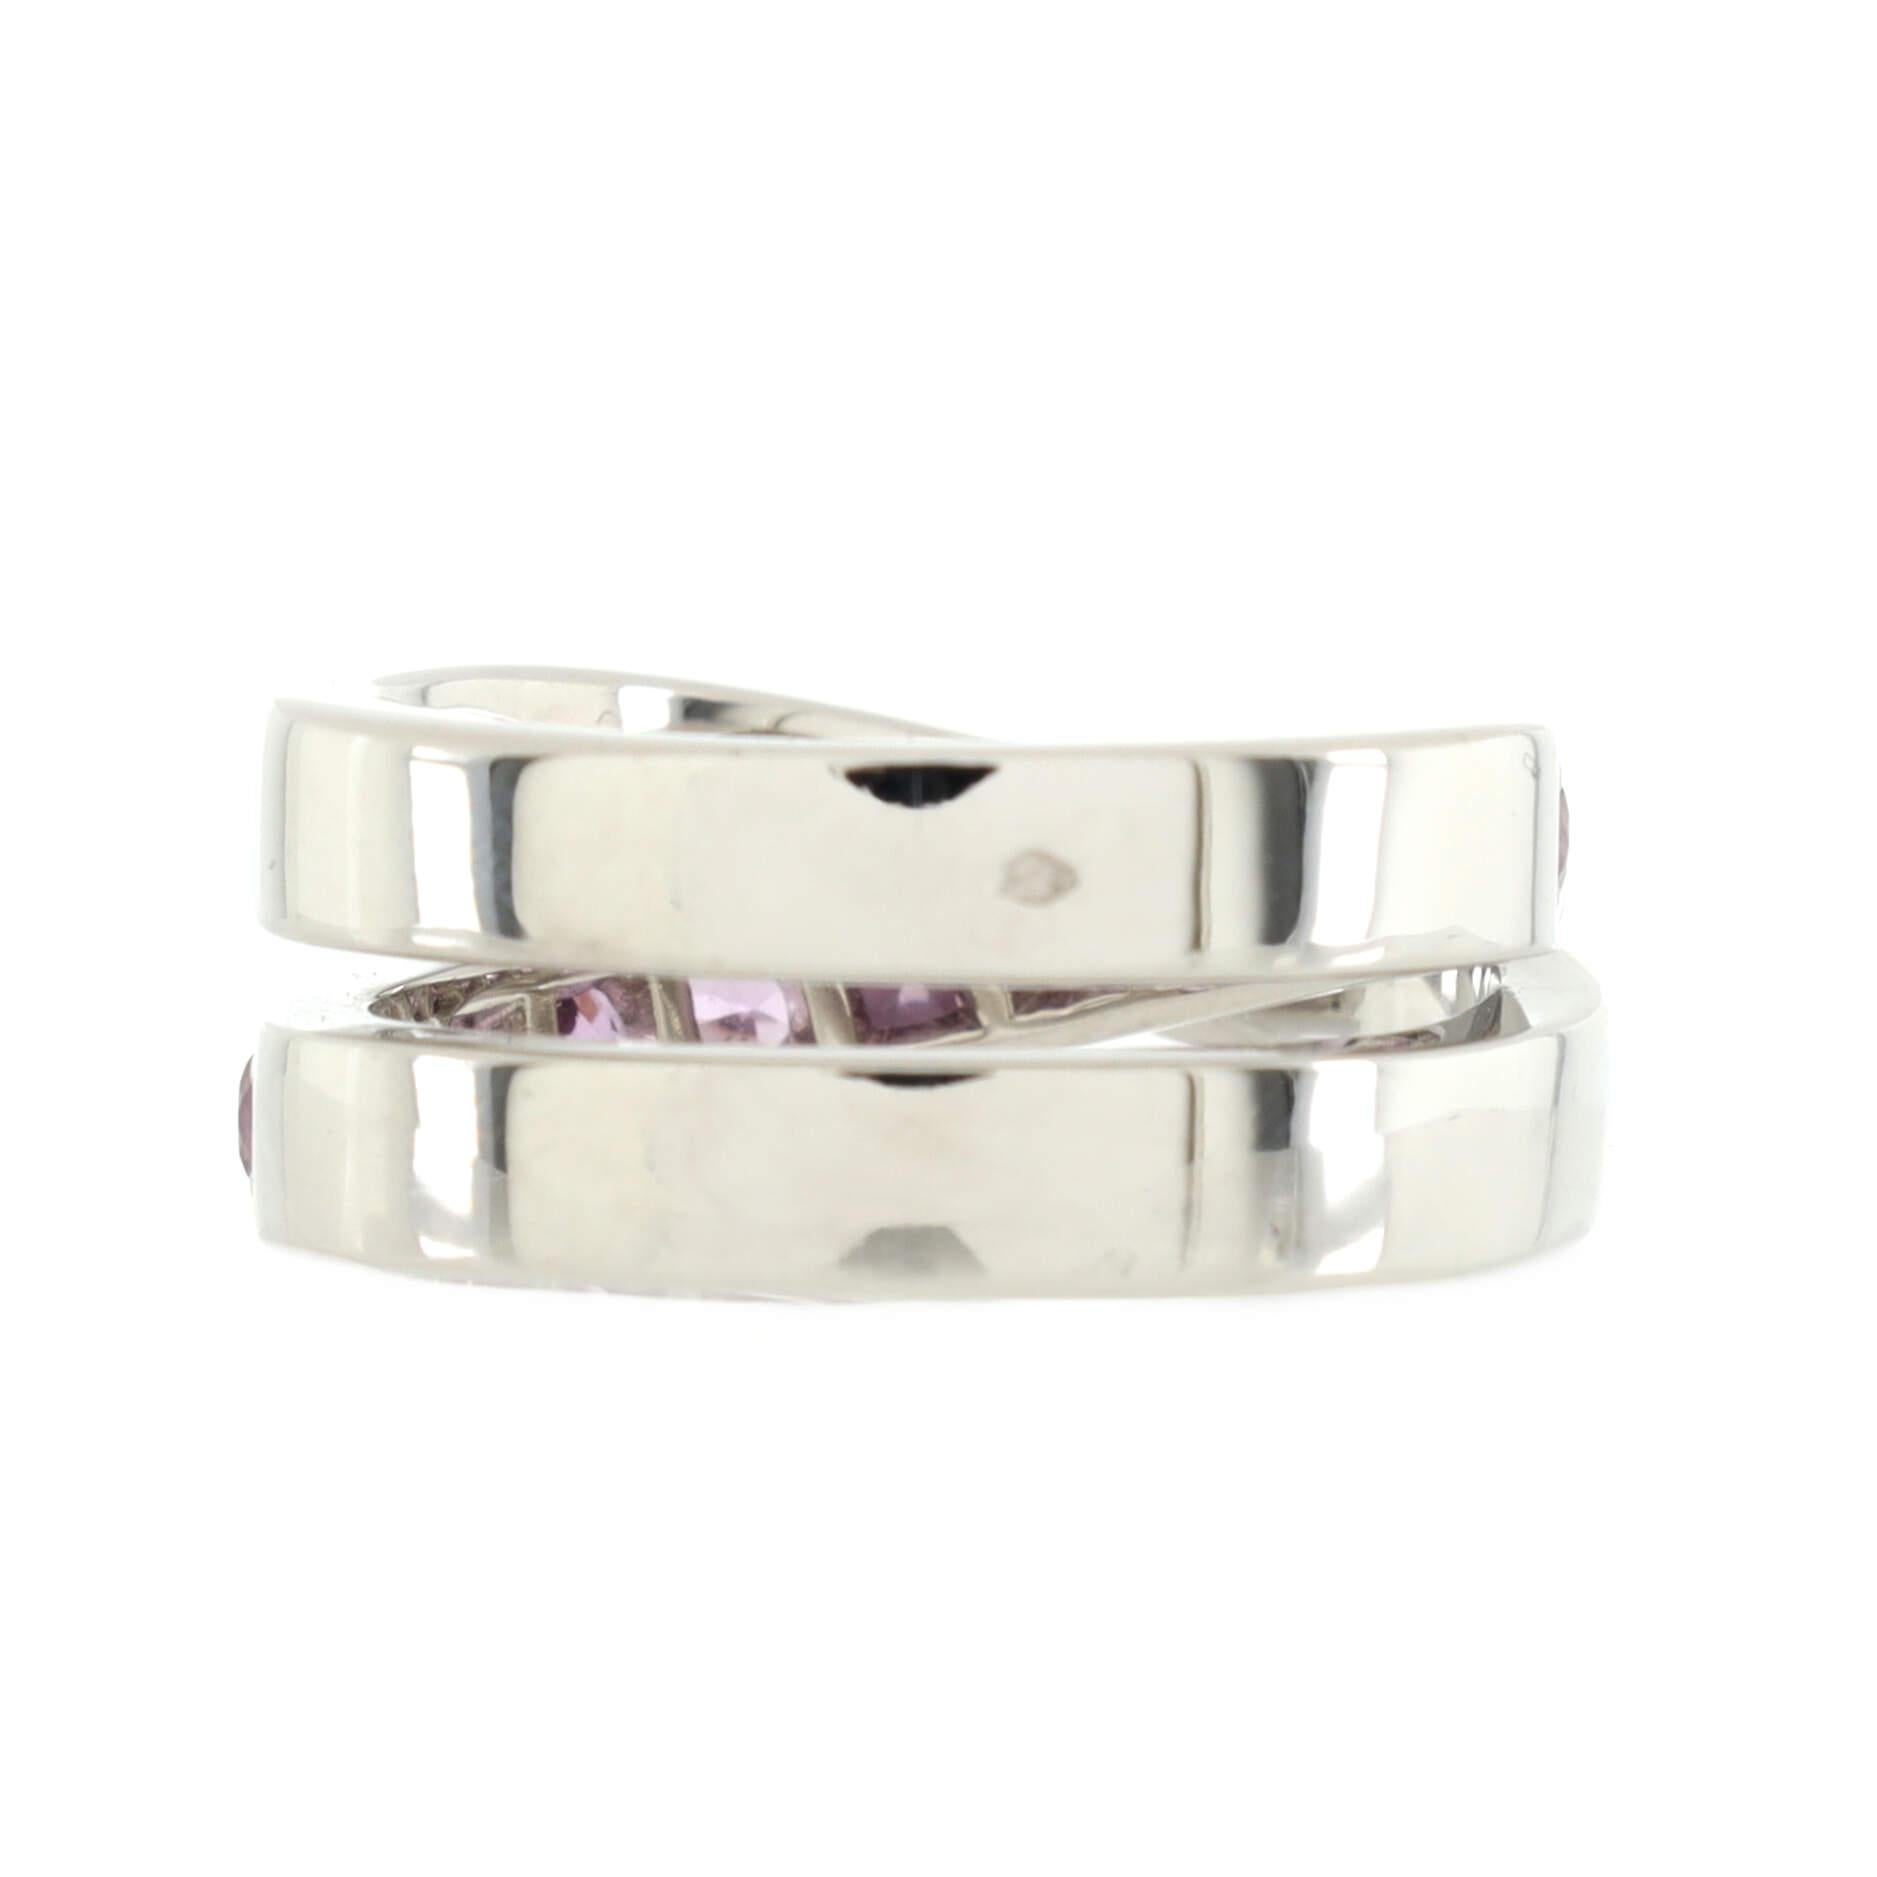 Condition: Great. Moderate wear throughout.
Accessories: No Accessories
Measurements: Size: 6.25 - 53, Width: 8.90 mm
Designer: Cartier
Model: Paris Nouvelle Vague Crossover Ring 18K White Gold with Pink Sapphires
Exterior Color: White Gold
Item